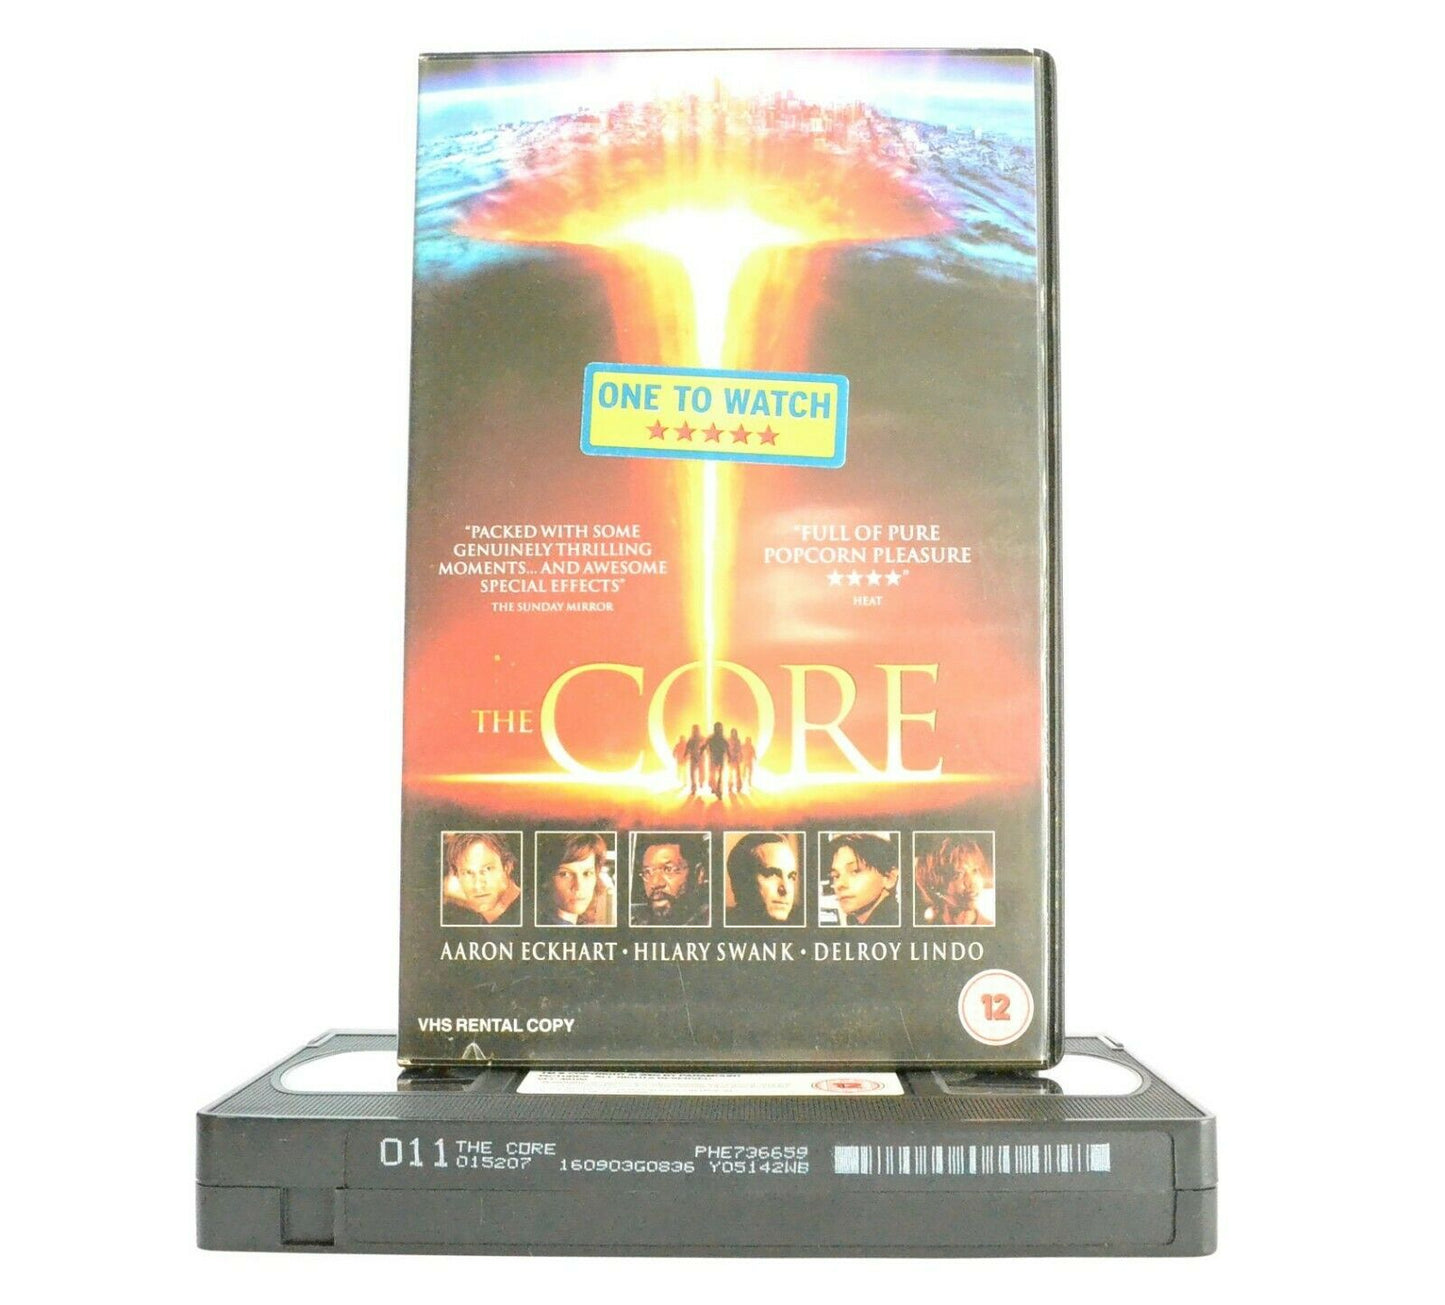 The Core: Sci-Fi Disaster Film (2003) - Large Box - A.Eckhart/H.Swank - Pal VHS-